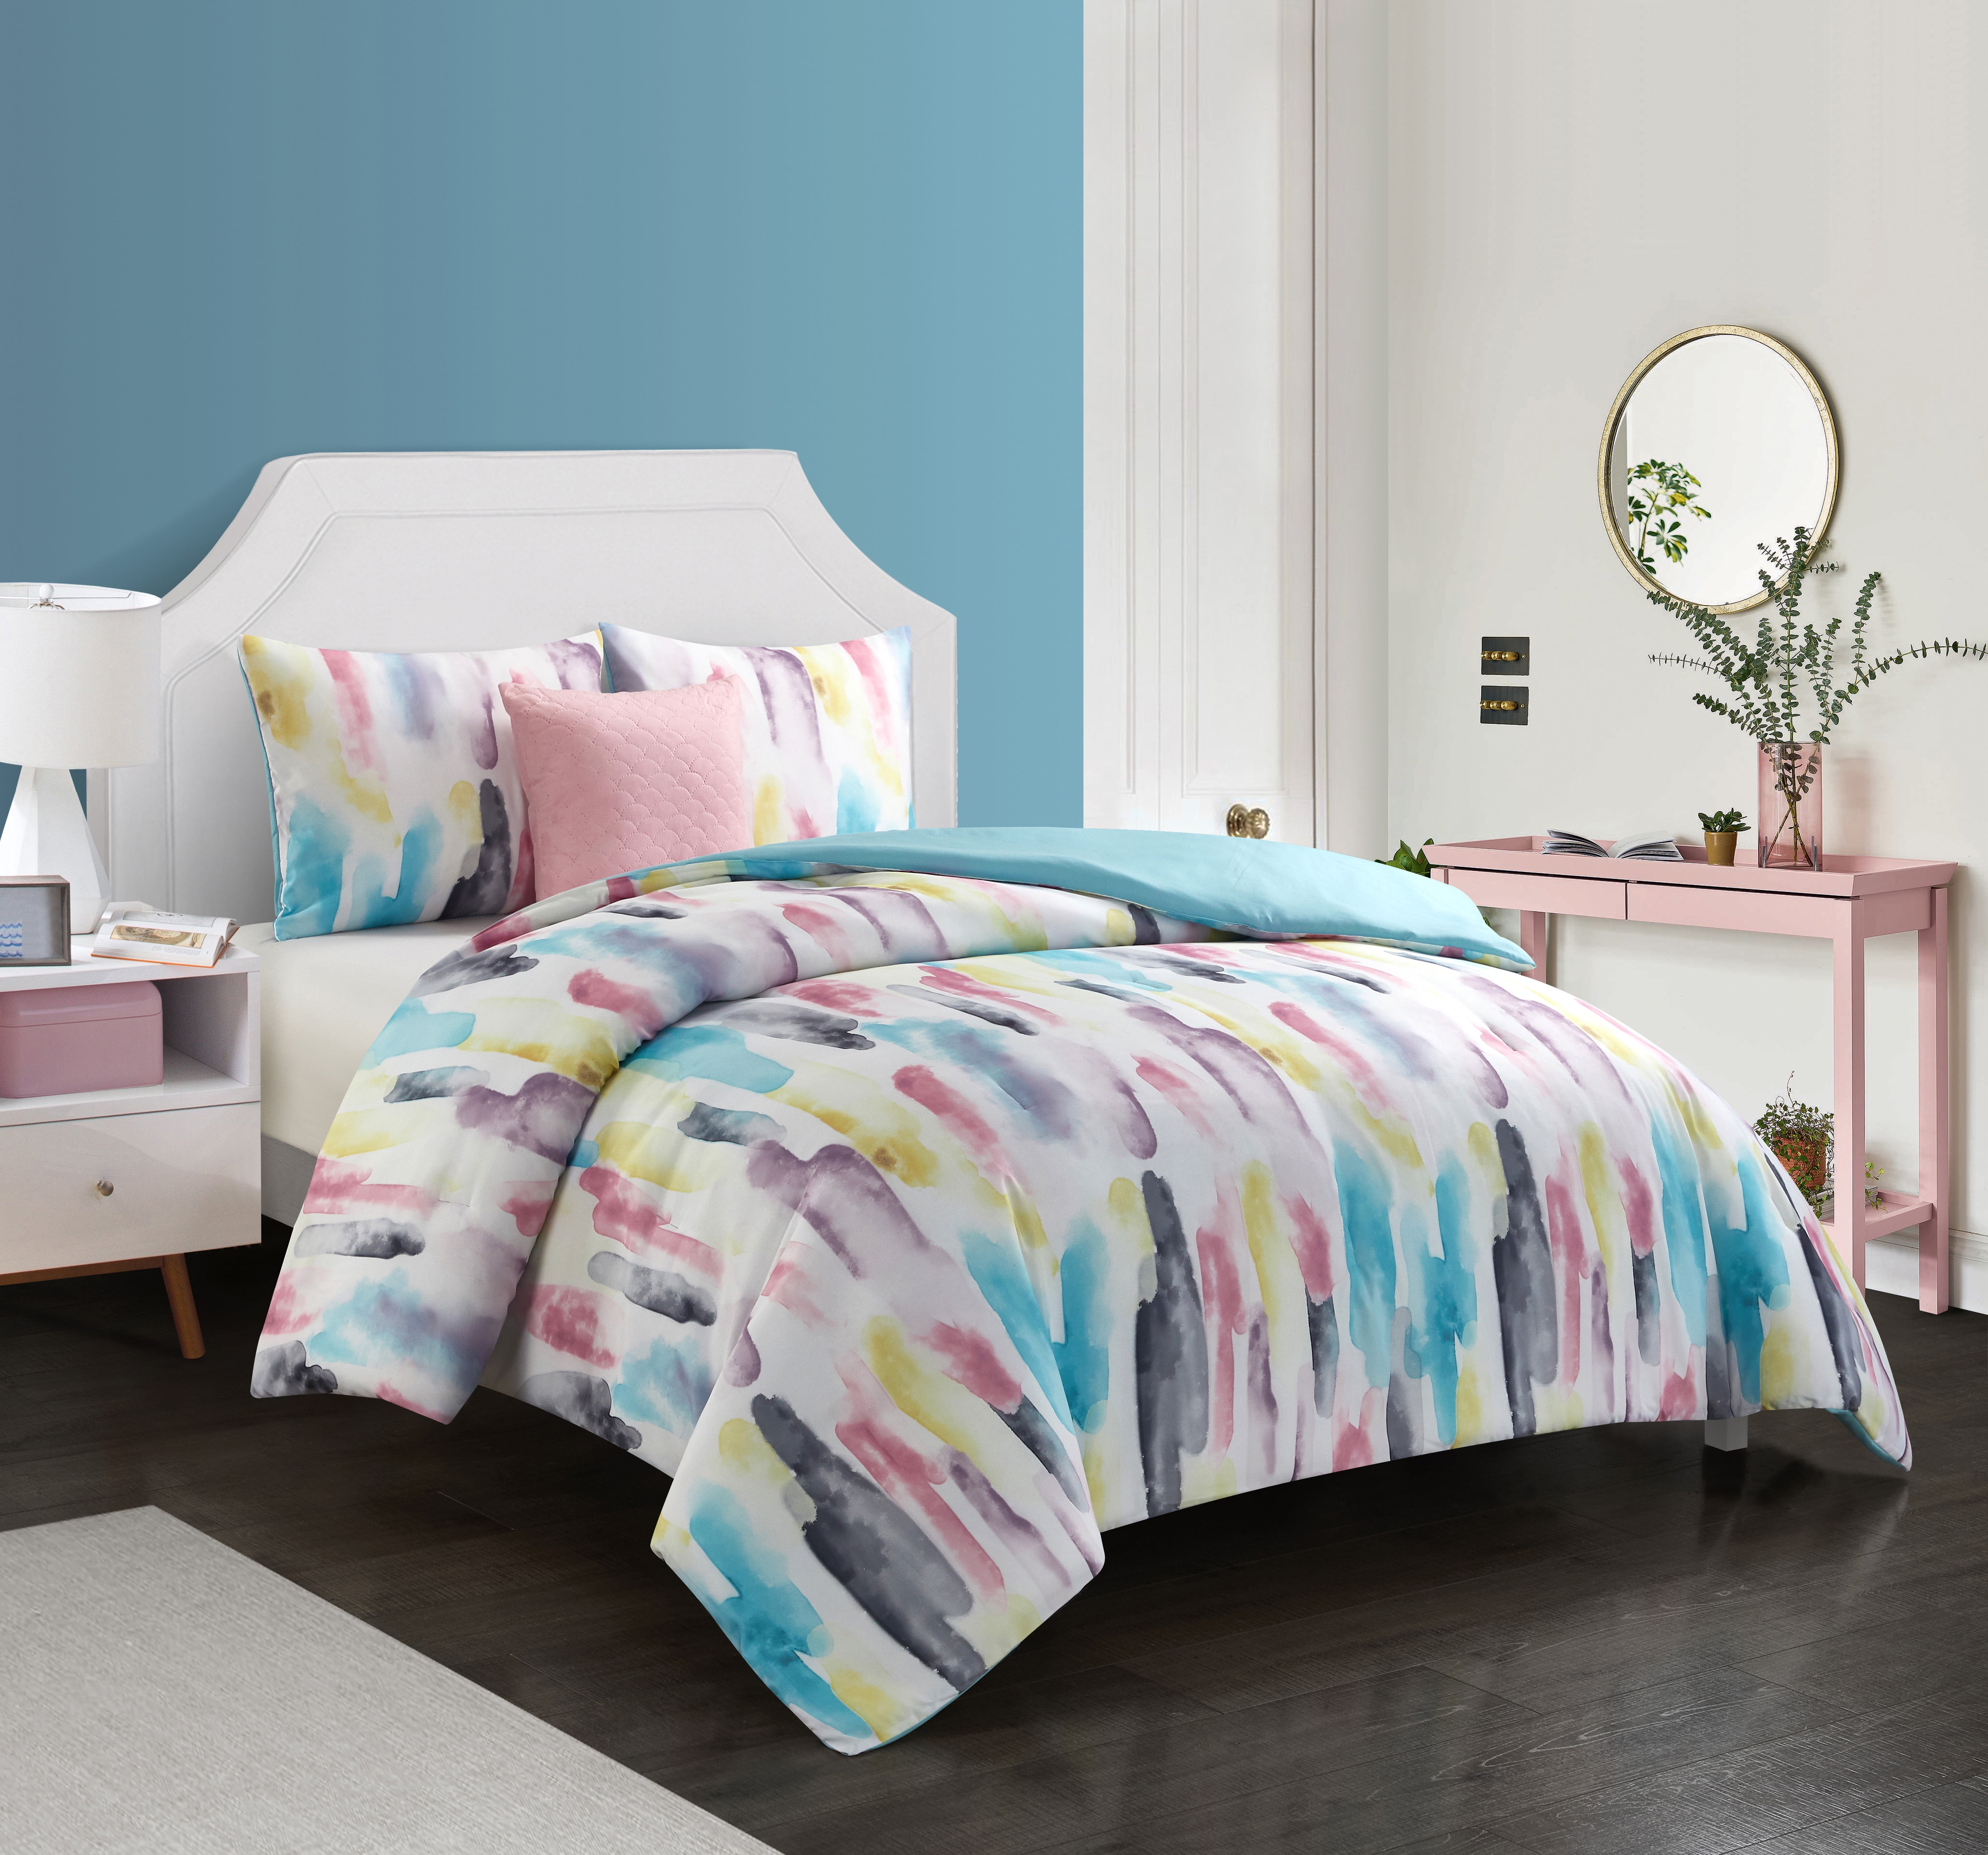 SAANA PINK DUVET COVER SET FLOWERS FLORAL WATER COLOUR BUTTERFLY BLUE GREEN LEAF 